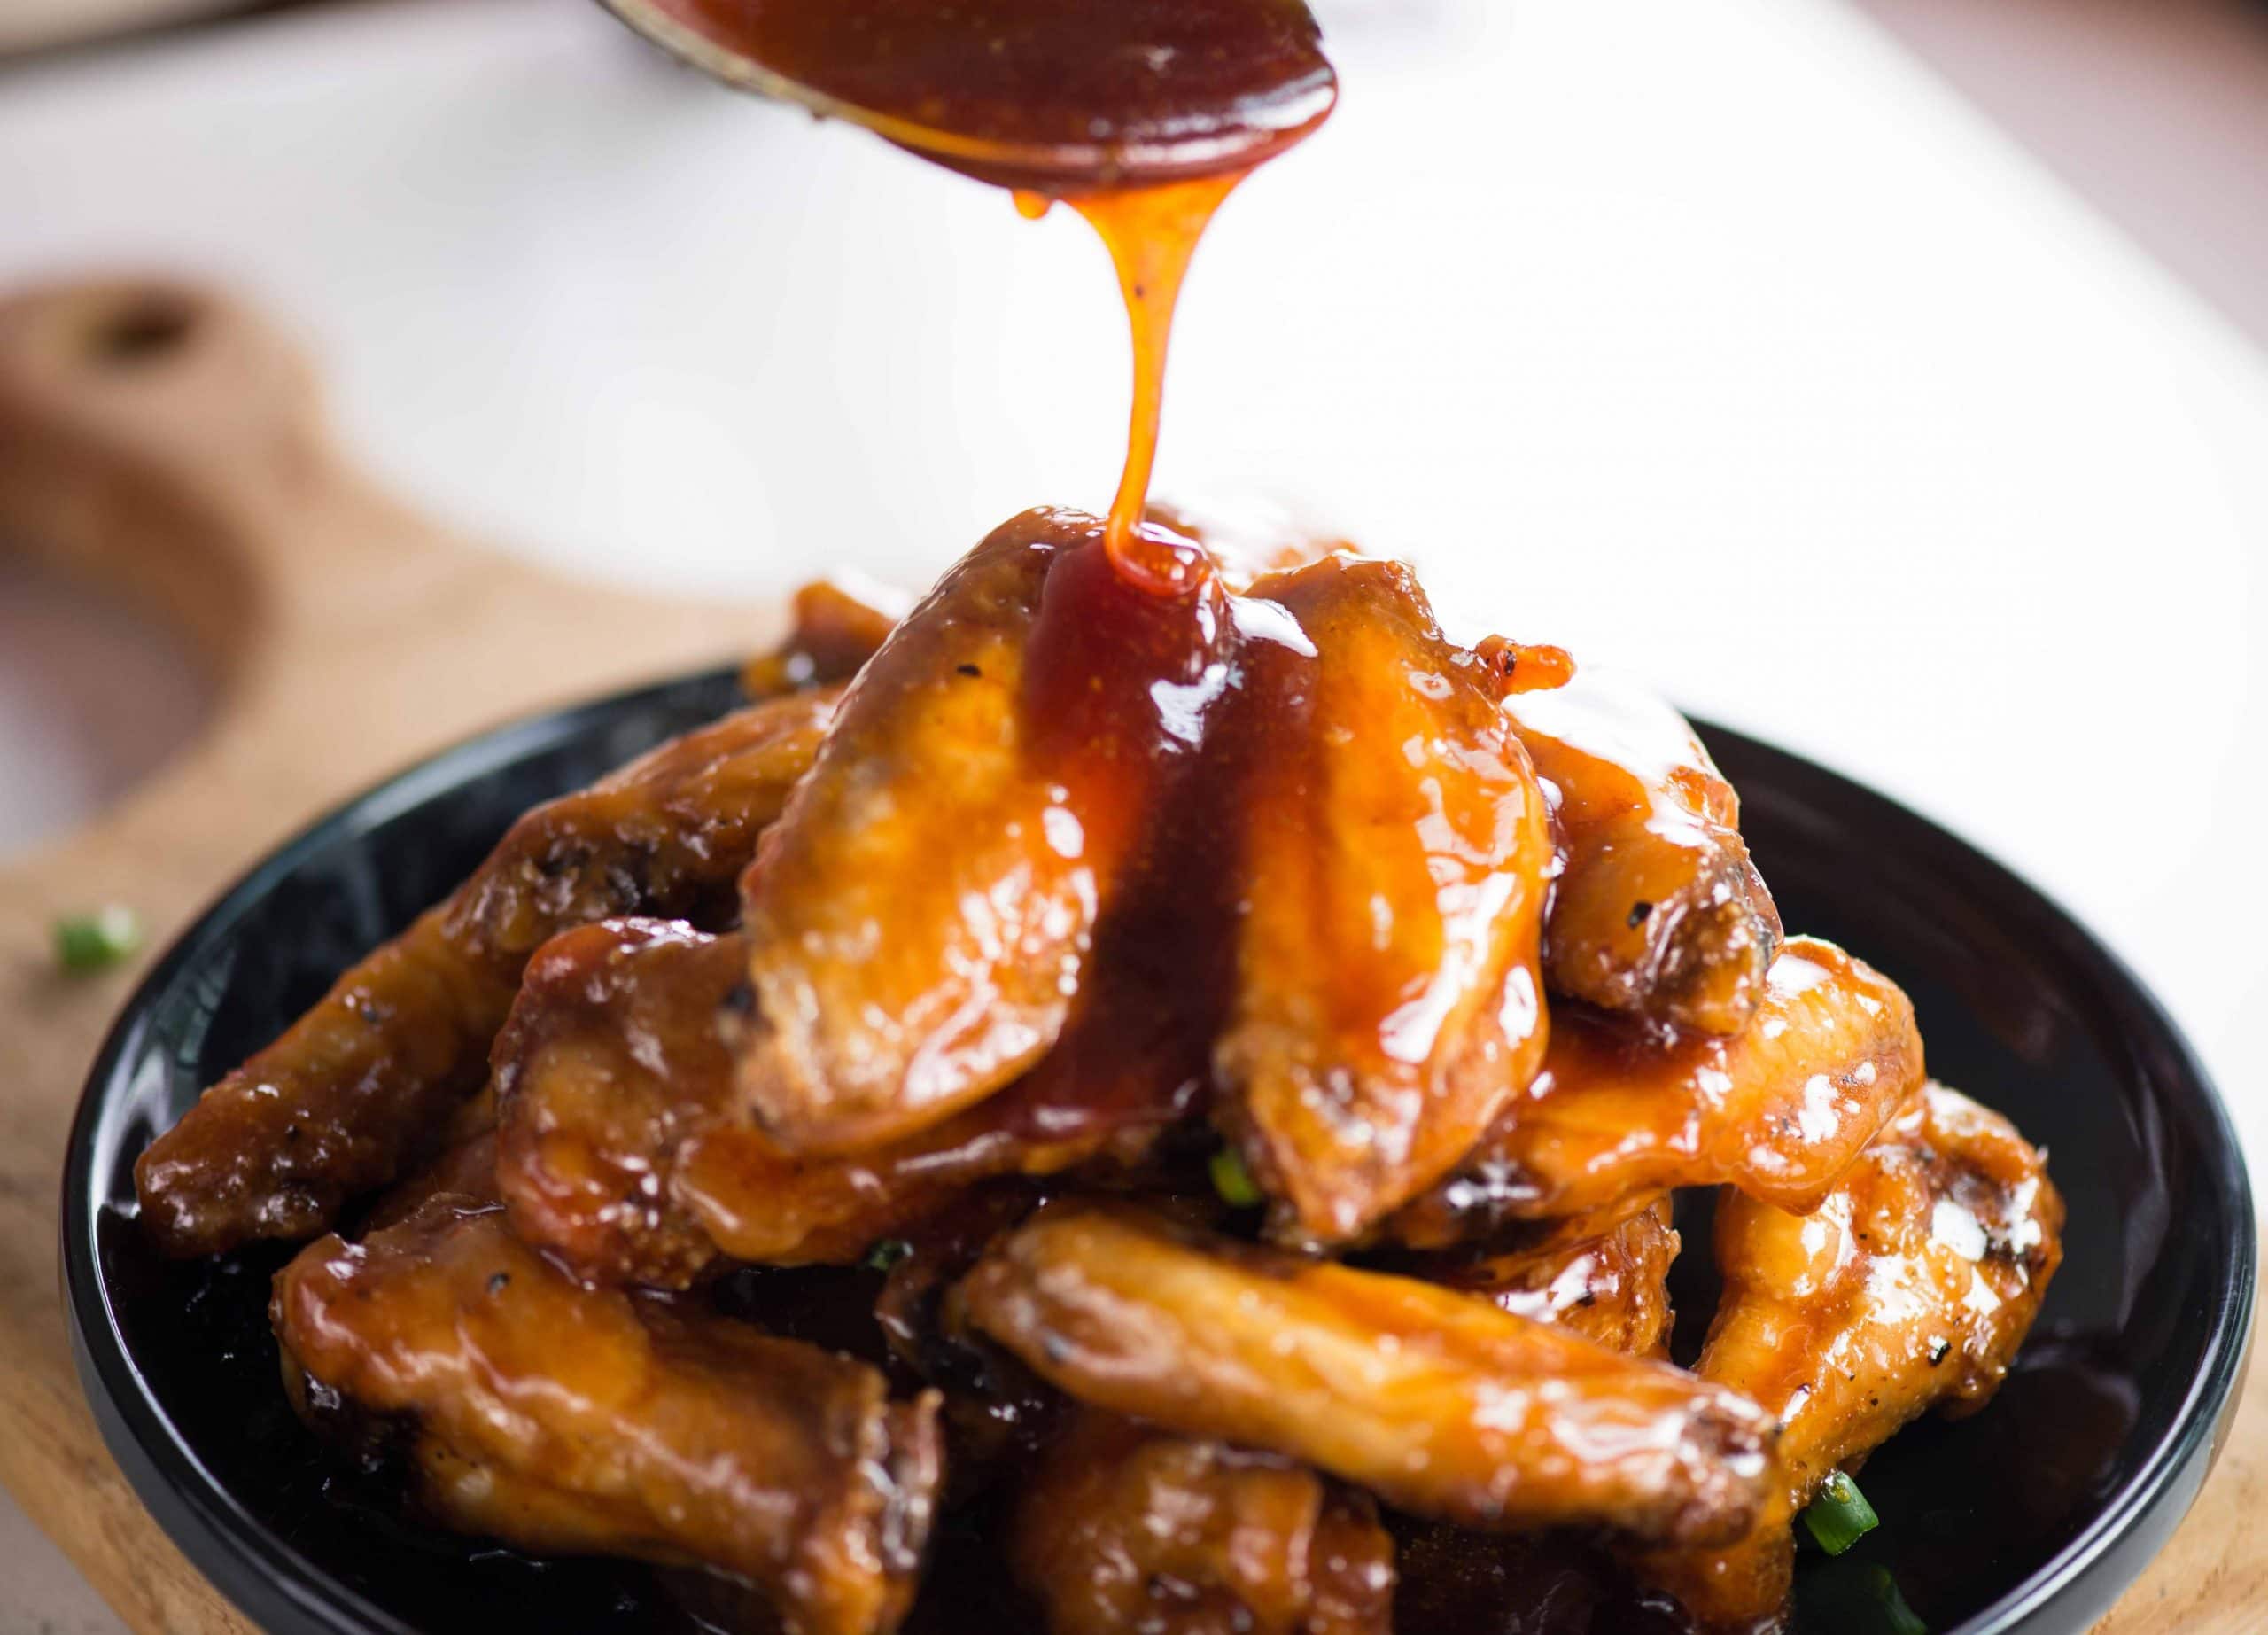 Crispy baked chicken wings are tossed in a sweet, sour and sticky sauce. These chicken wings are addictive and perfect party appetizer. 